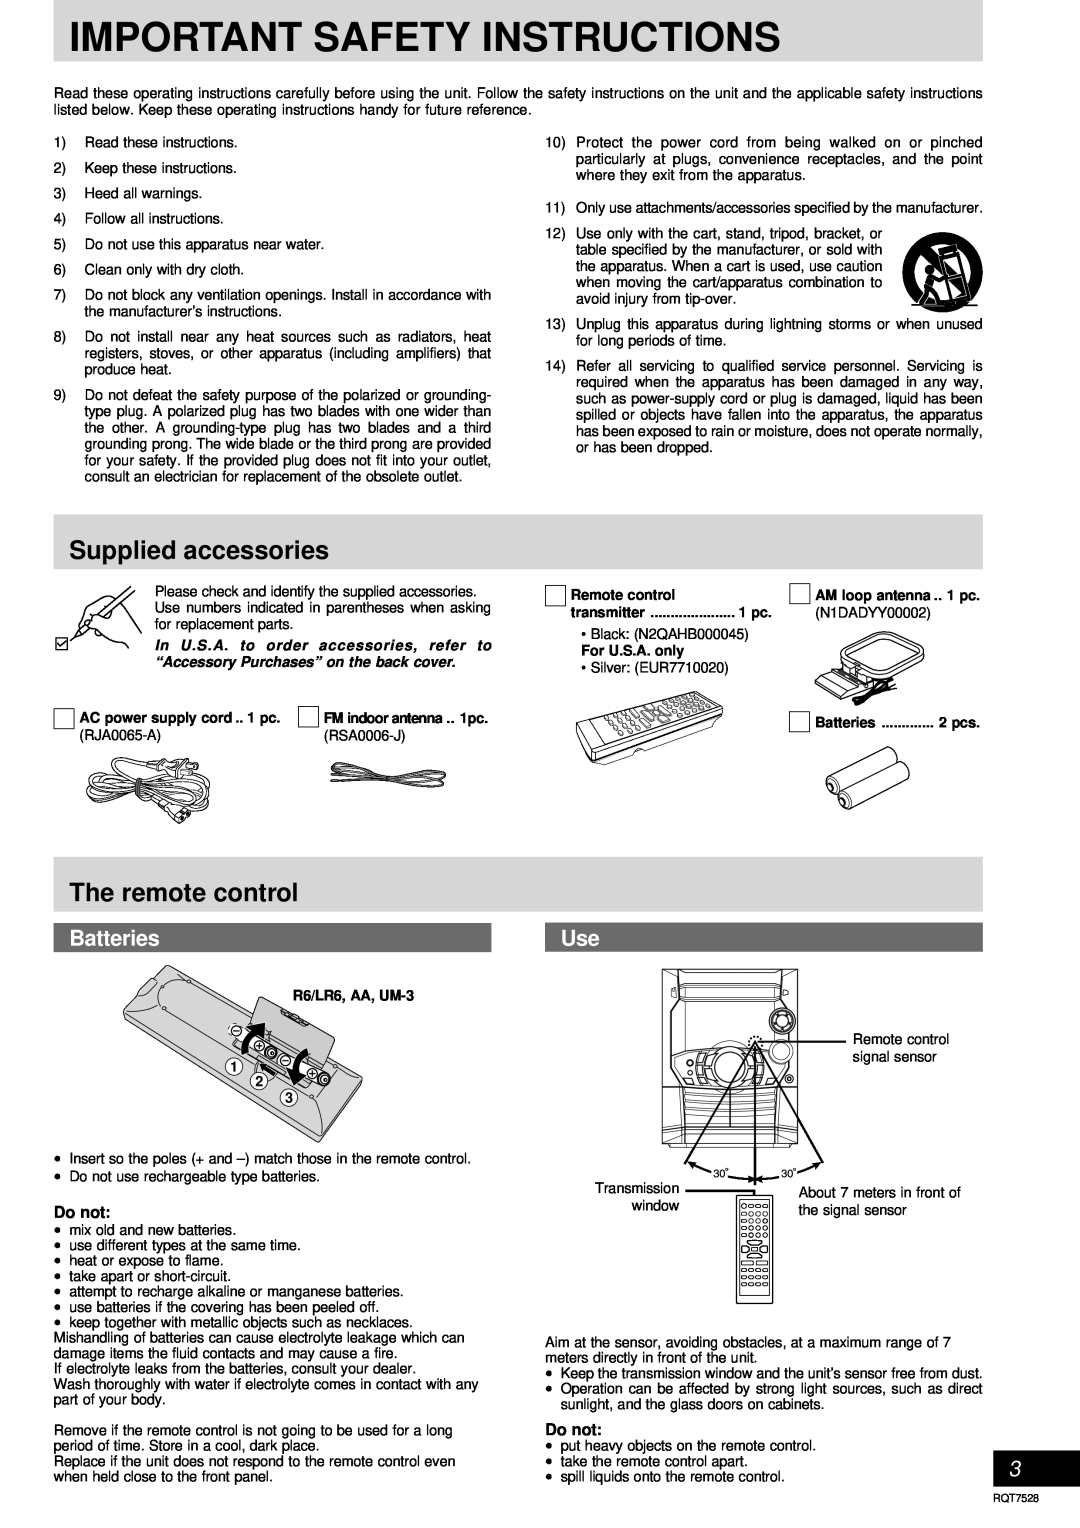 Panasonic SC-AK220 Supplied accessories, The remote control, Batteries, Important Safety Instructions 